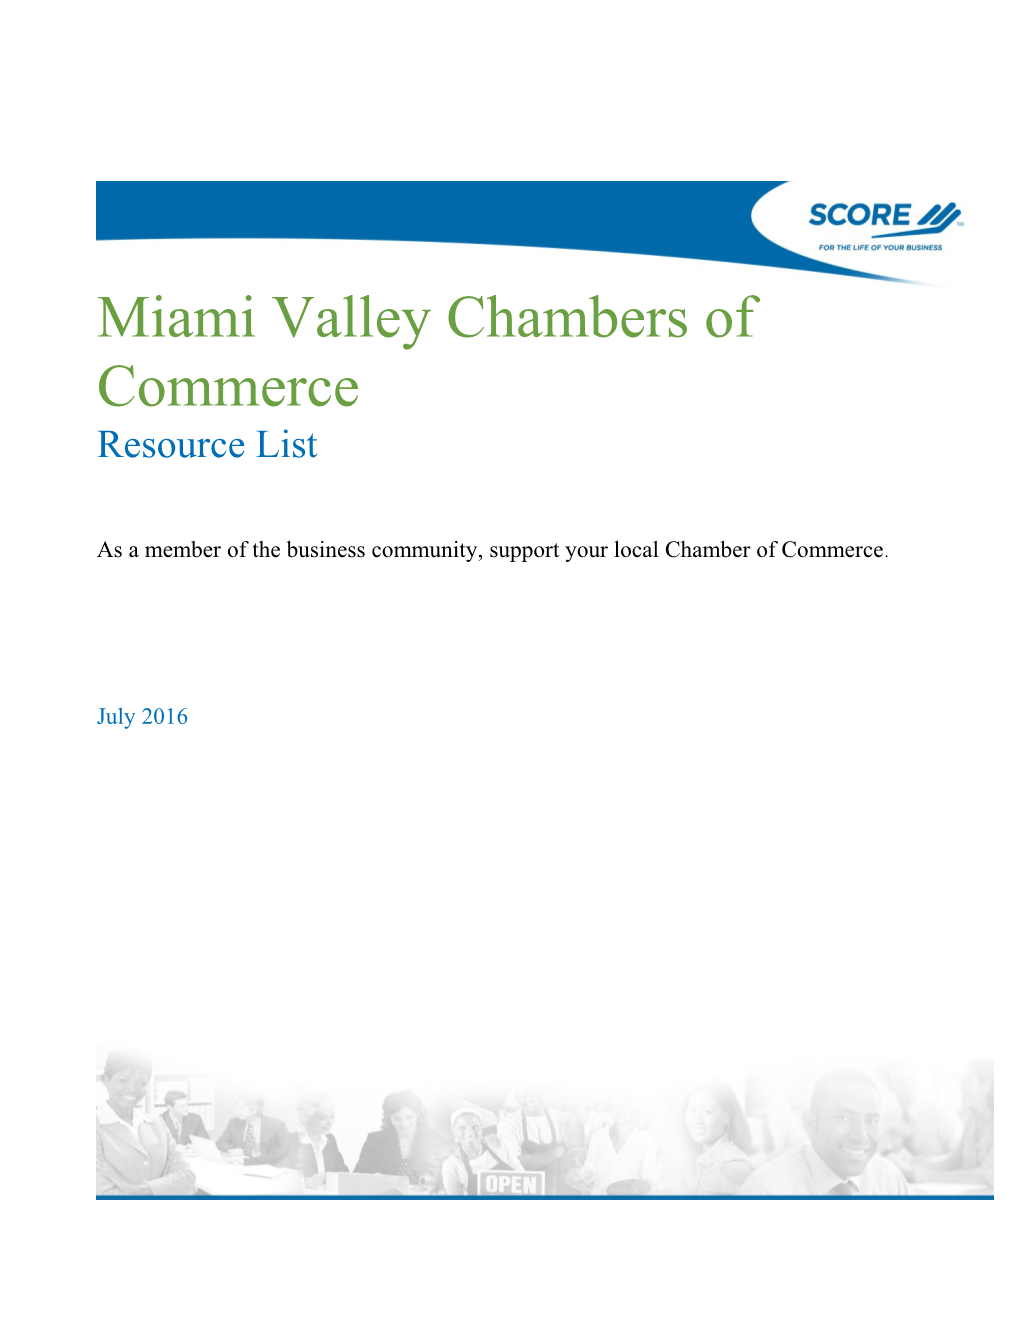 Miami Valley Chambers of Commerce